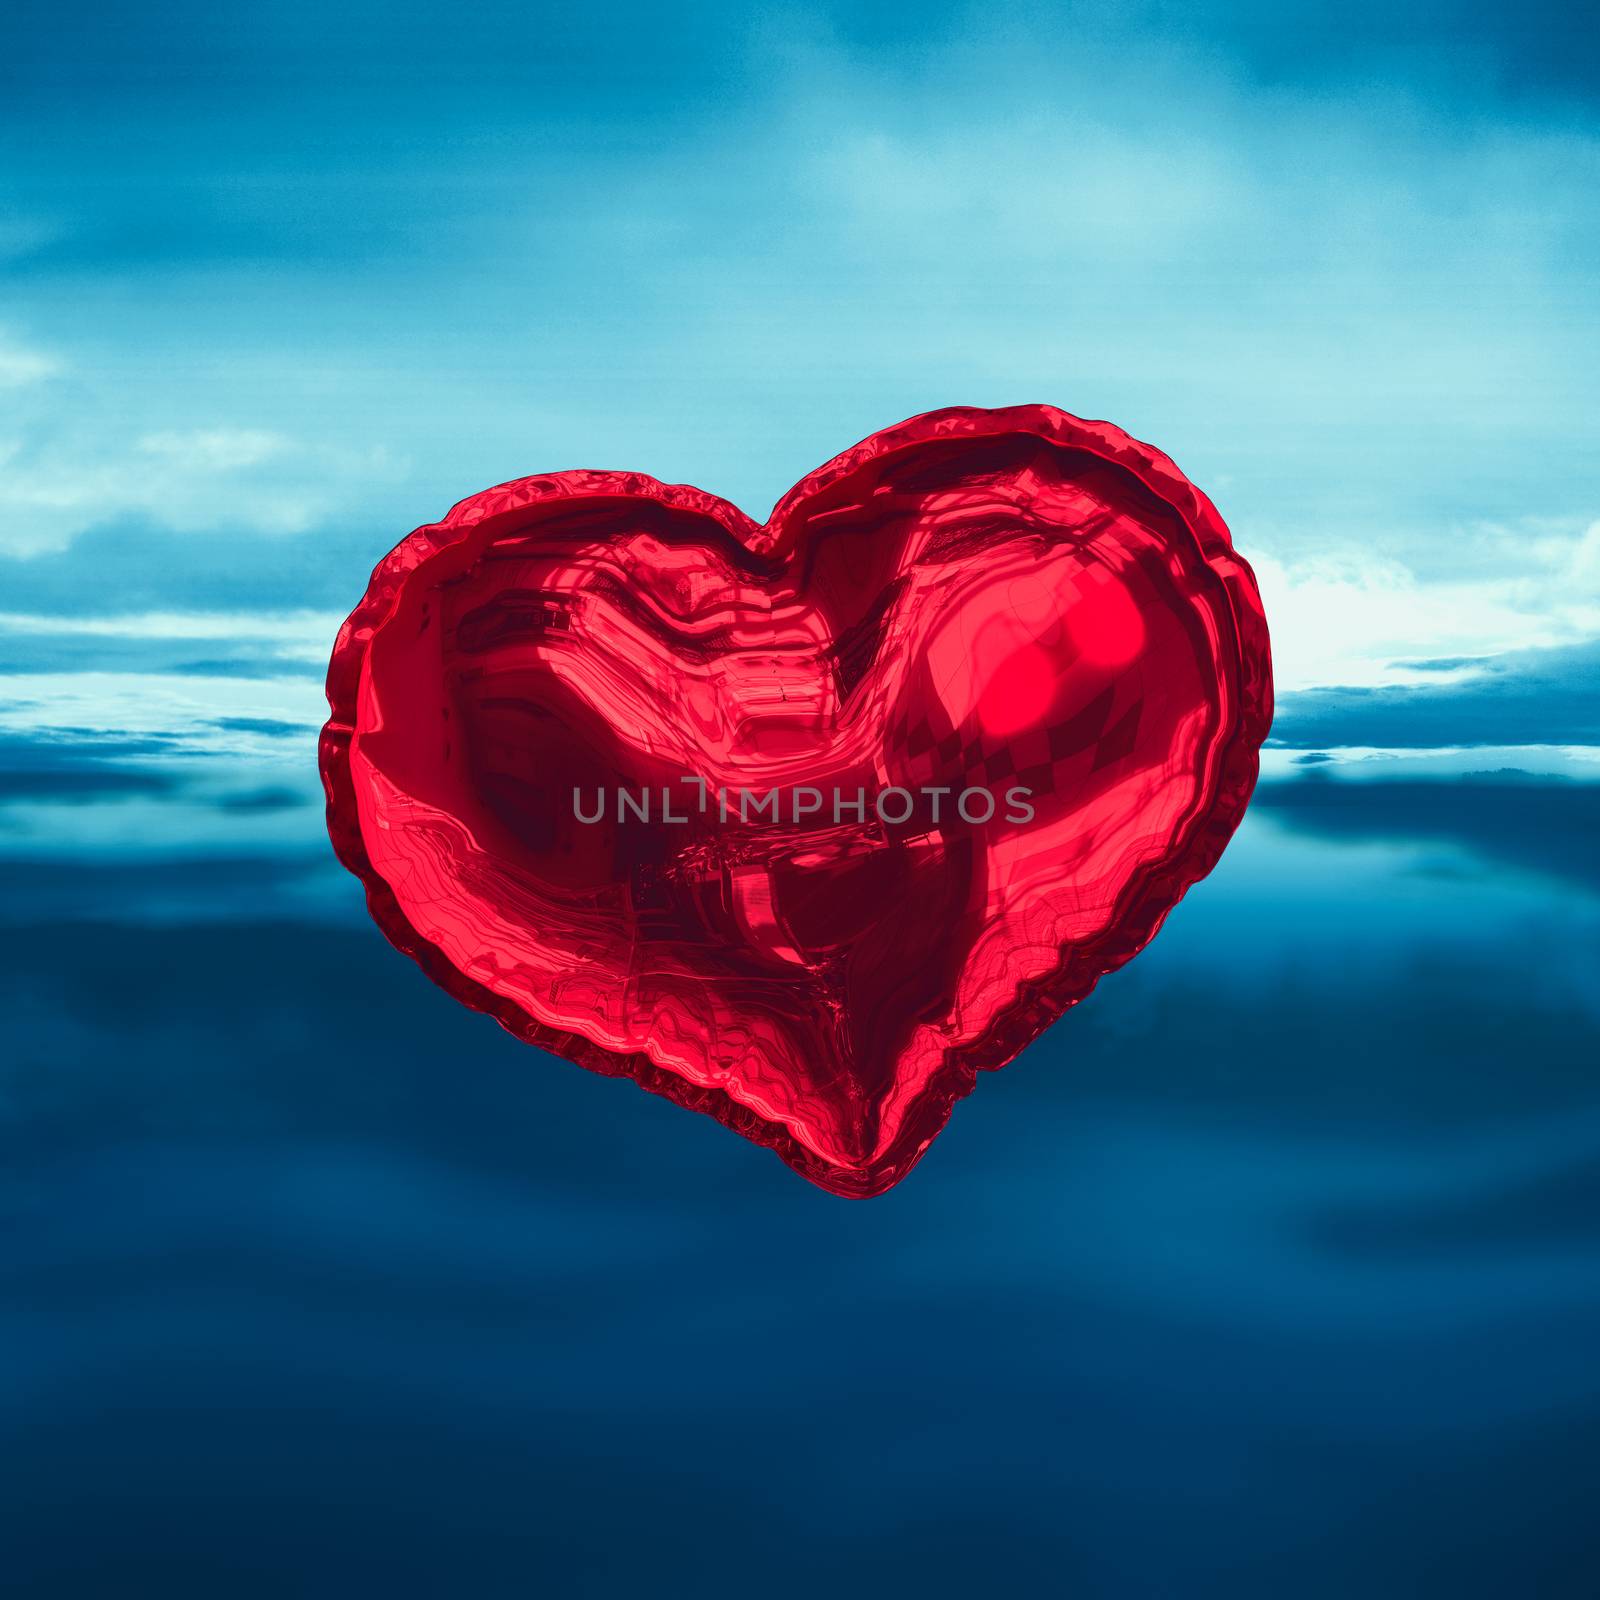 Composite image of red heart balloon by Wavebreakmedia